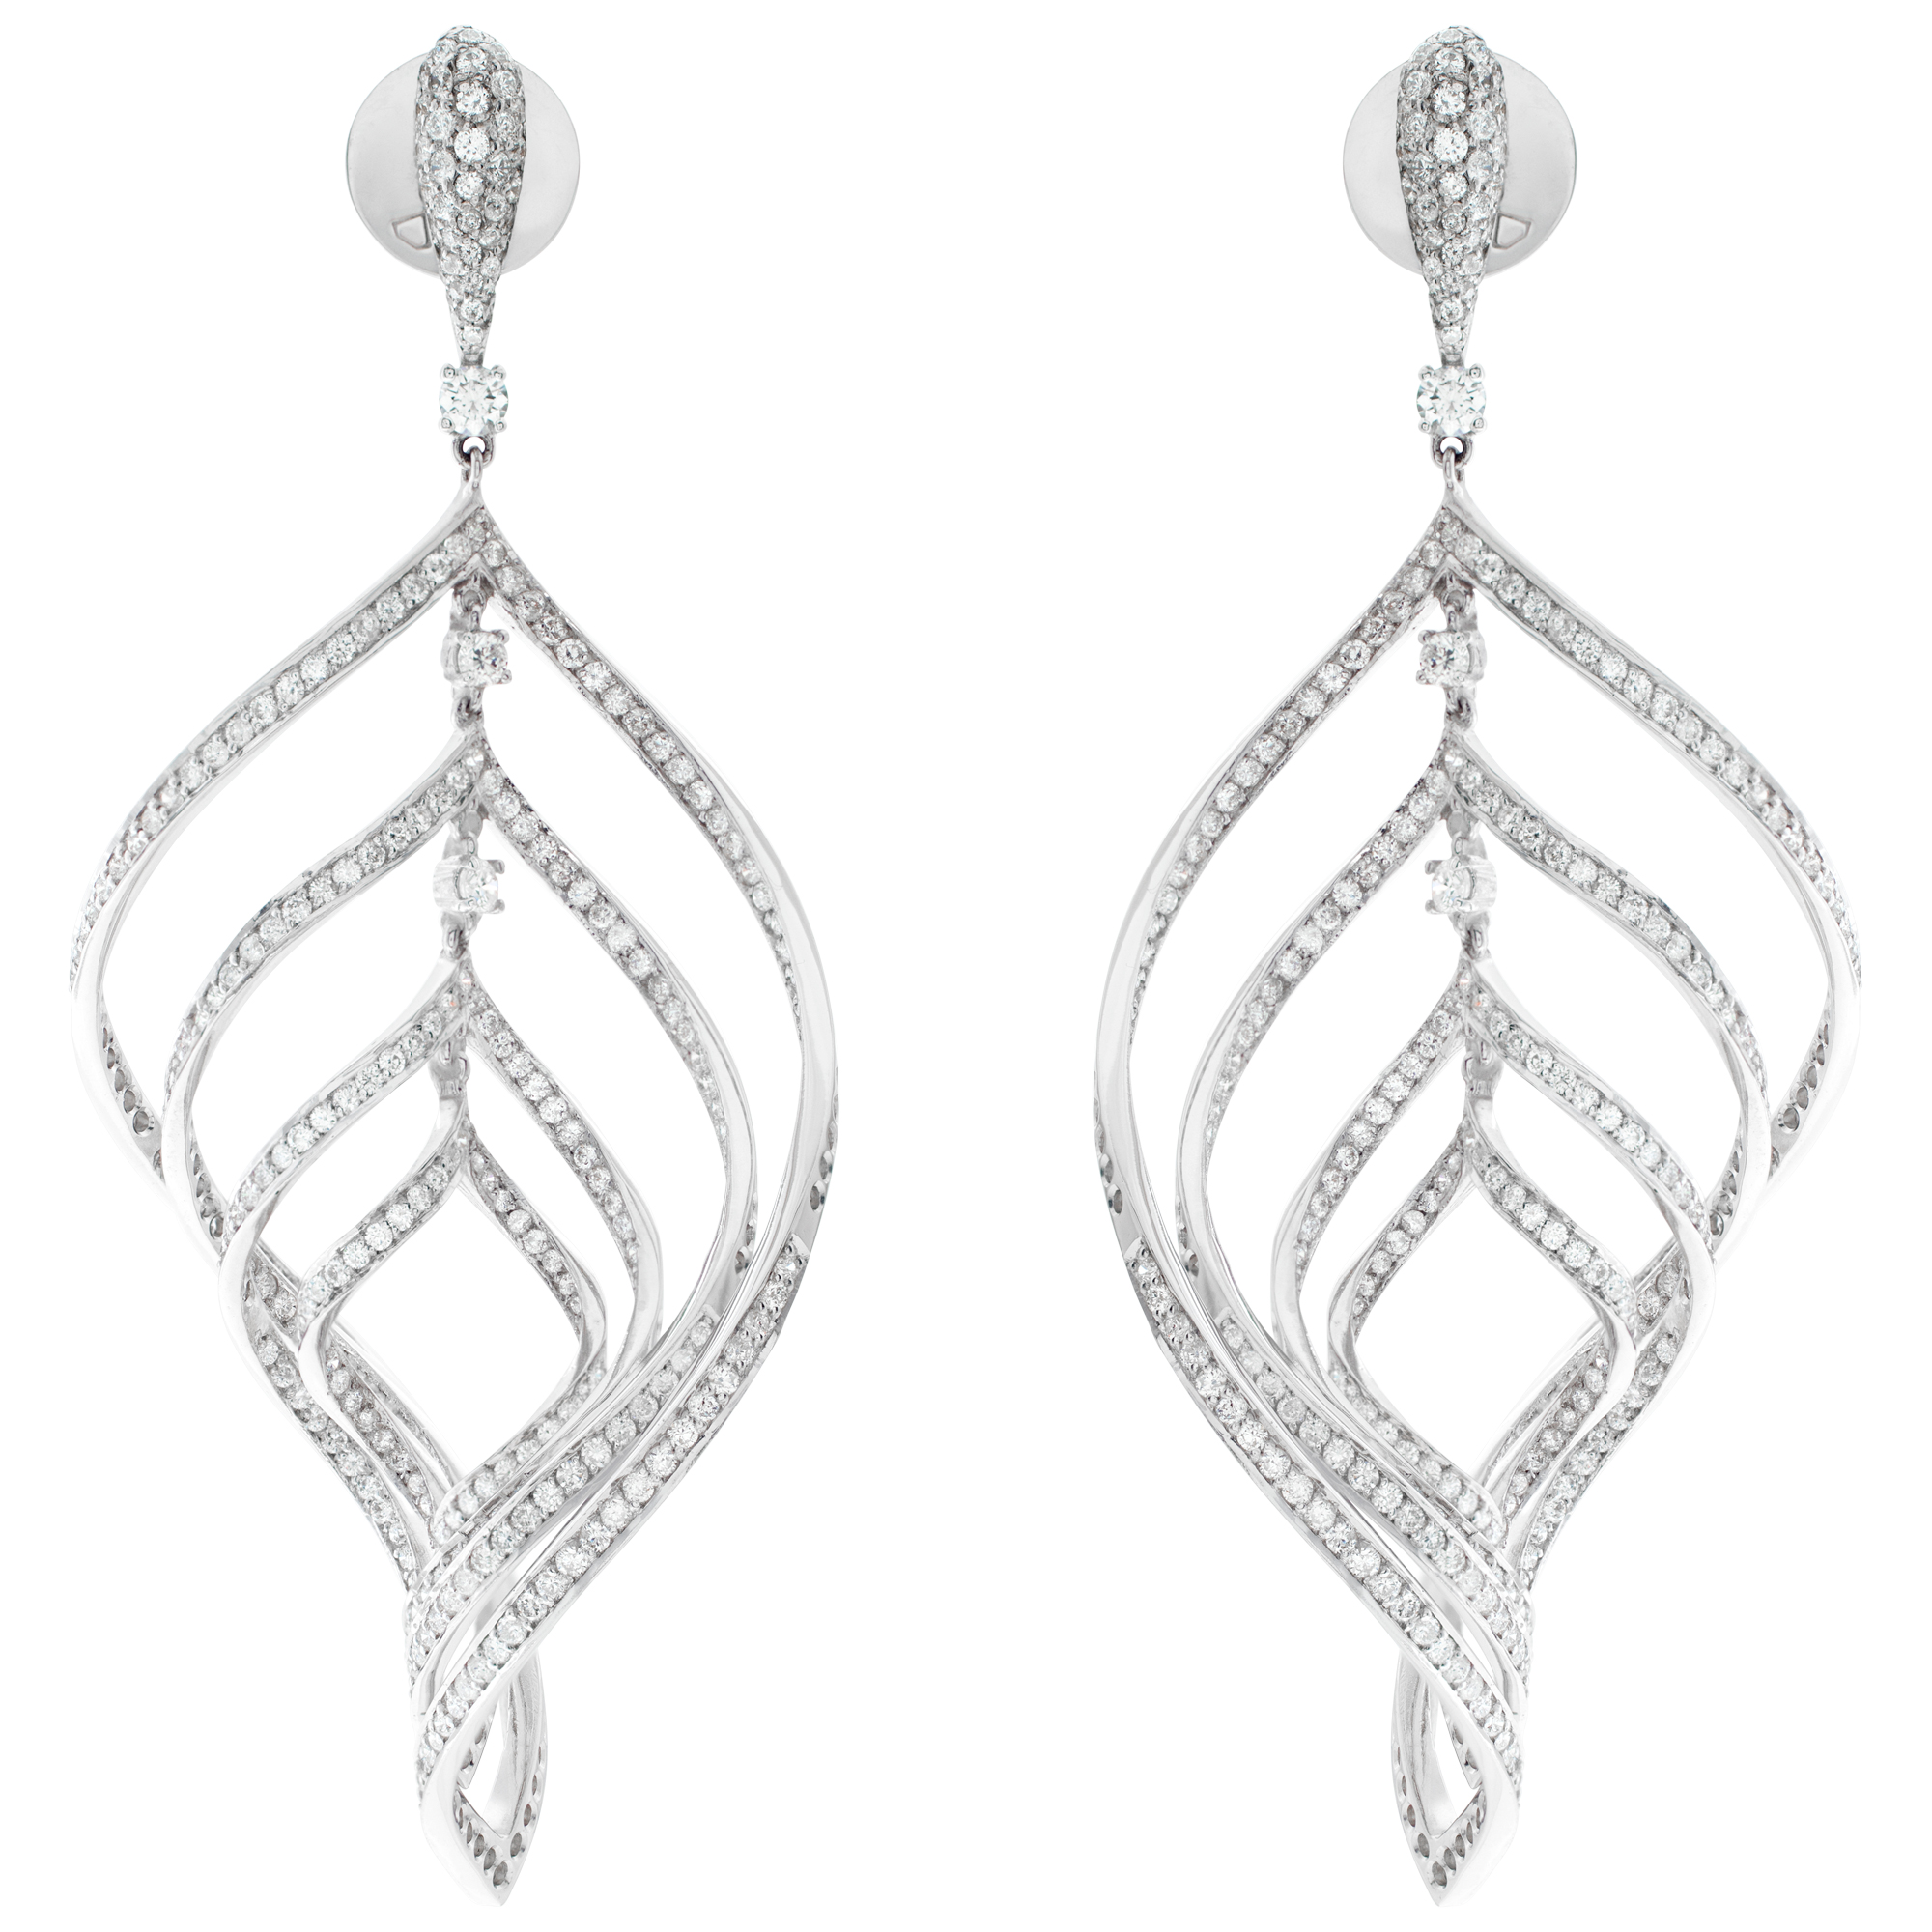 Dangling diamond earrings in shape of a swirling leaf, set in 18k white gold. Total approx. diamonds weight over 6.00 carats